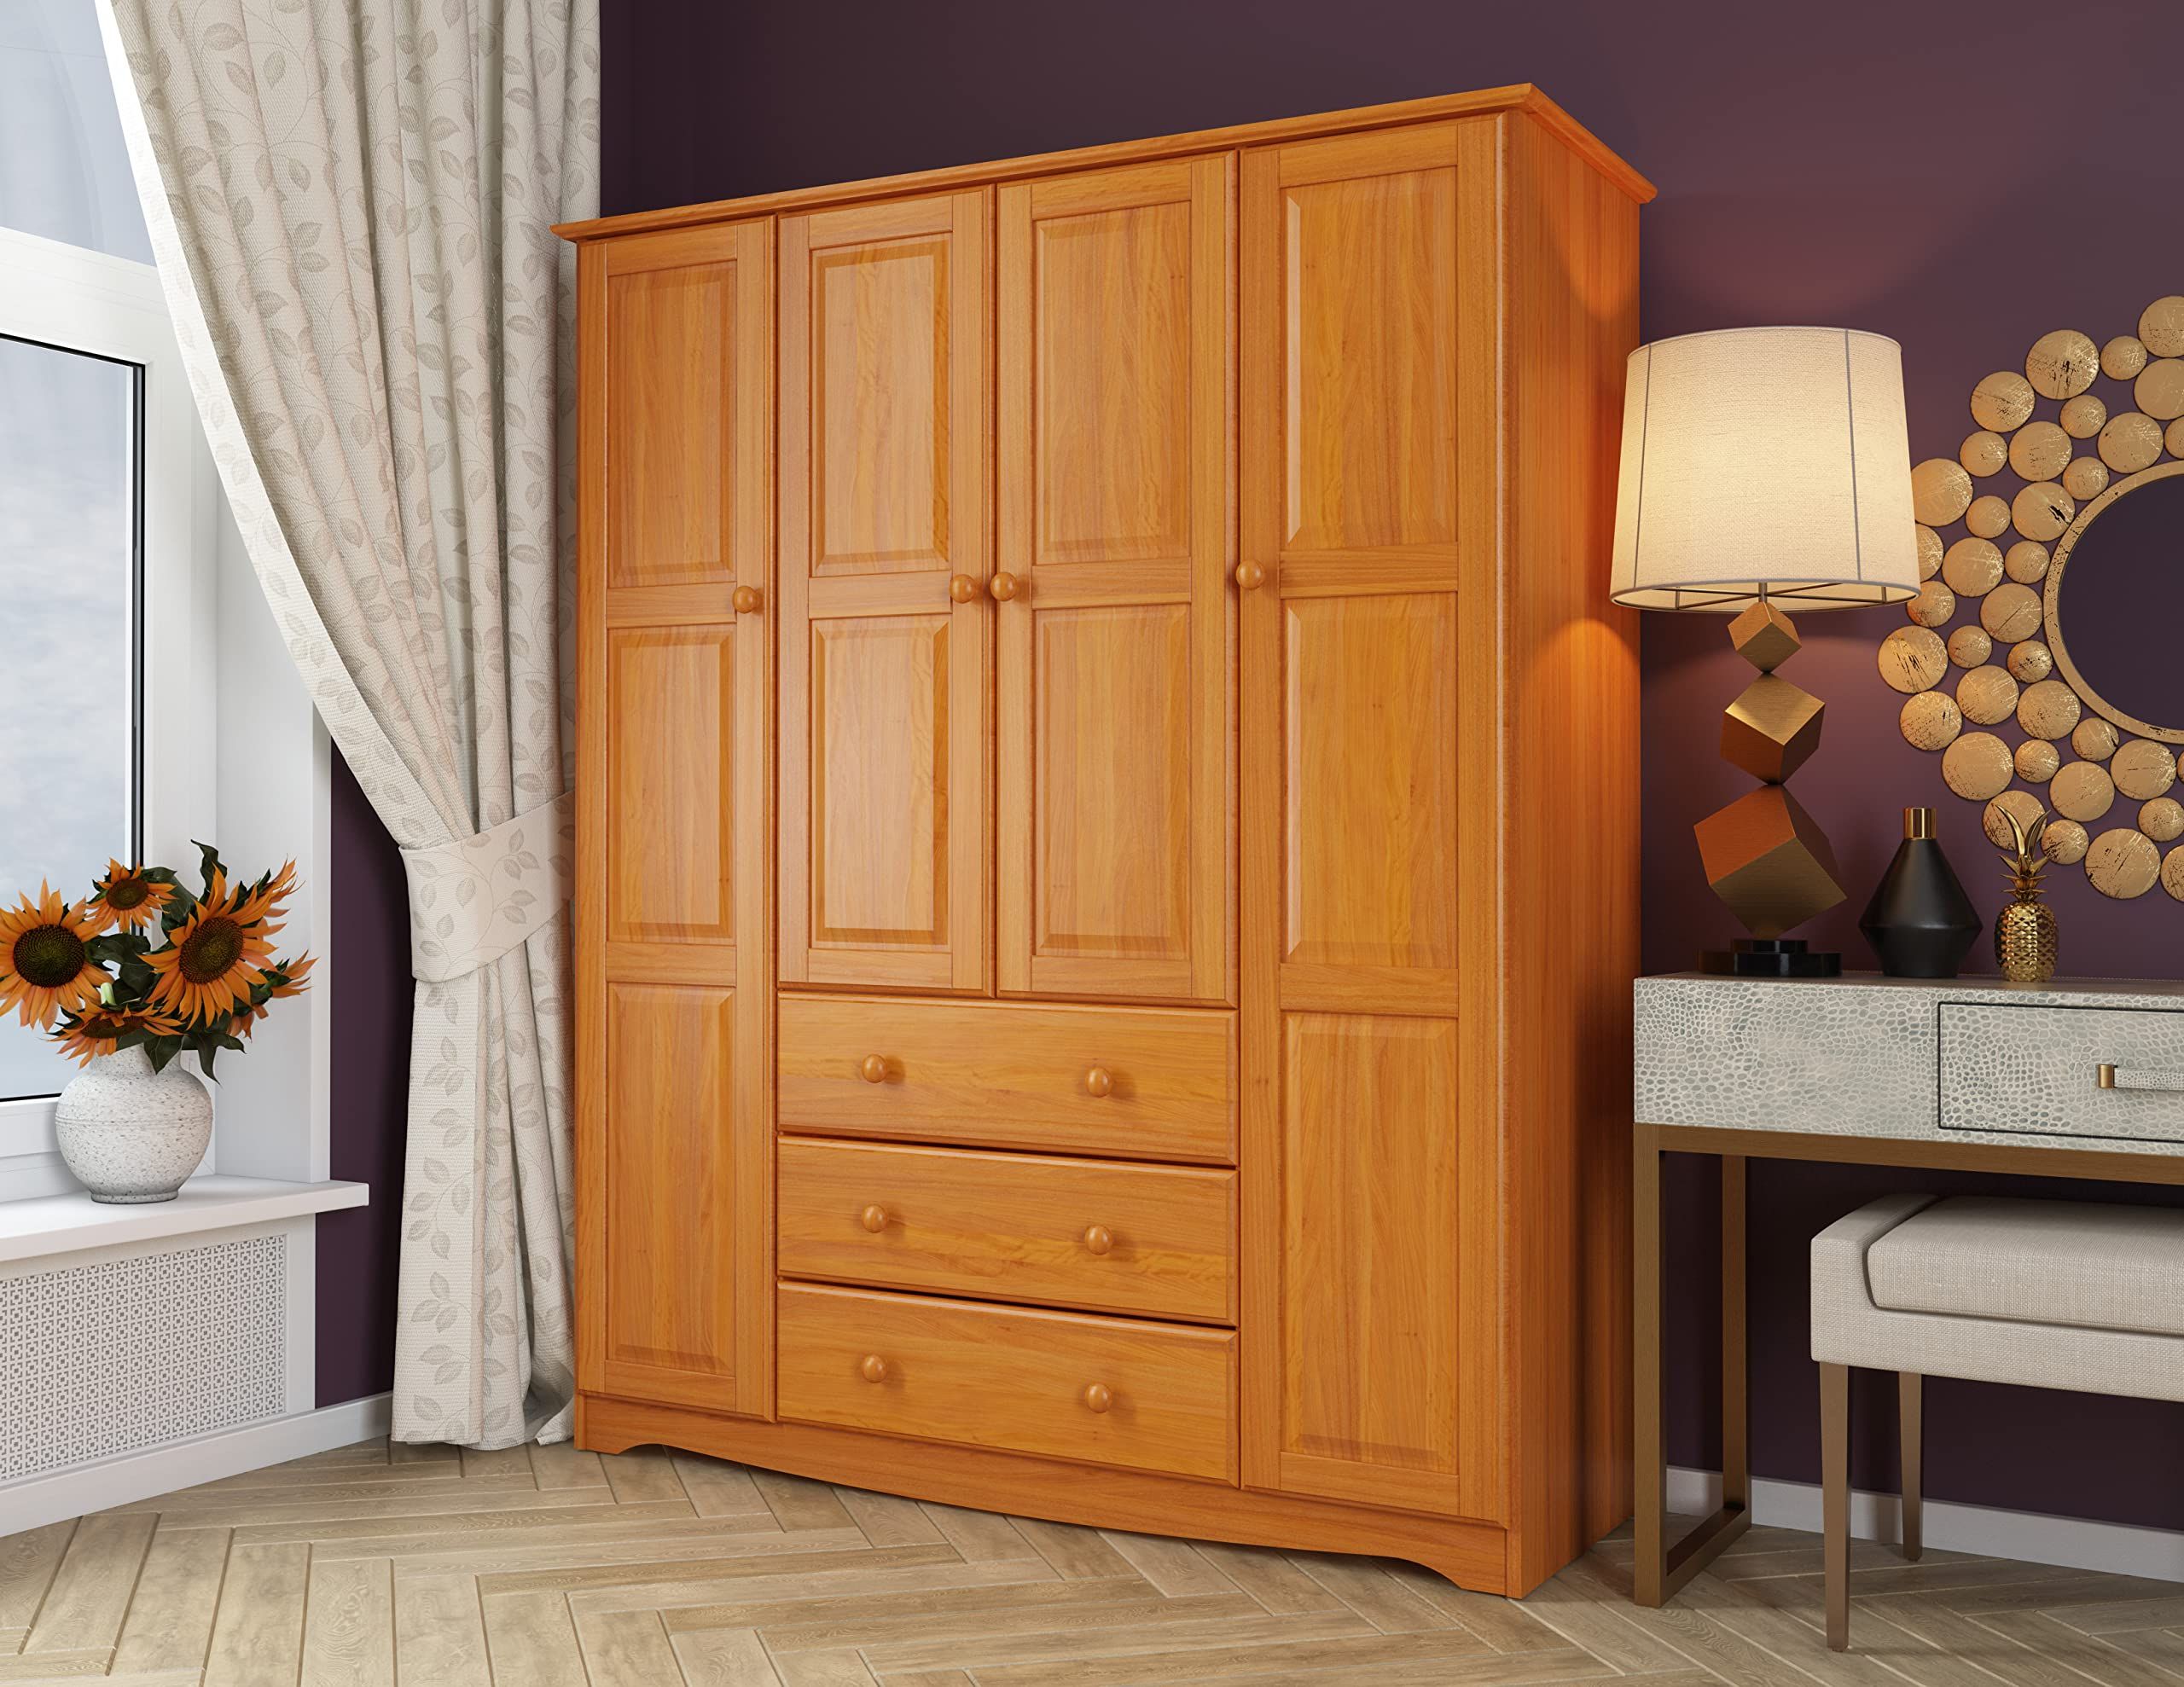 [%amazon: Palace Imports 100% Solid Wood Family Wardrobe/armoire/closet,  Honey Pine. 3 Clothing Rods Included. No Shelves Included. Optional Shelves  Sold Separately. 60.25" W X 72" H X 20.75" D : Home & Kitchen Within Well Known 60 Inch Wardrobes|60 Inch Wardrobes Pertaining To Well Known Amazon: Palace Imports 100% Solid Wood Family Wardrobe/armoire/closet,  Honey Pine. 3 Clothing Rods Included. No Shelves Included. Optional Shelves  Sold Separately. 60.25" W X 72" H X 20.75" D : Home & Kitchen|2017 60 Inch Wardrobes Within Amazon: Palace Imports 100% Solid Wood Family Wardrobe/armoire/closet,  Honey Pine. 3 Clothing Rods Included. No Shelves Included. Optional Shelves  Sold Separately. 60.25" W X 72" H X 20.75" D : Home & Kitchen|2018 Amazon: Palace Imports 100% Solid Wood Family Wardrobe/armoire/closet,  Honey Pine. 3 Clothing Rods Included. No Shelves Included. Optional Shelves  Sold Separately. 60.25" W X 72" H X  (View 3 of 10)